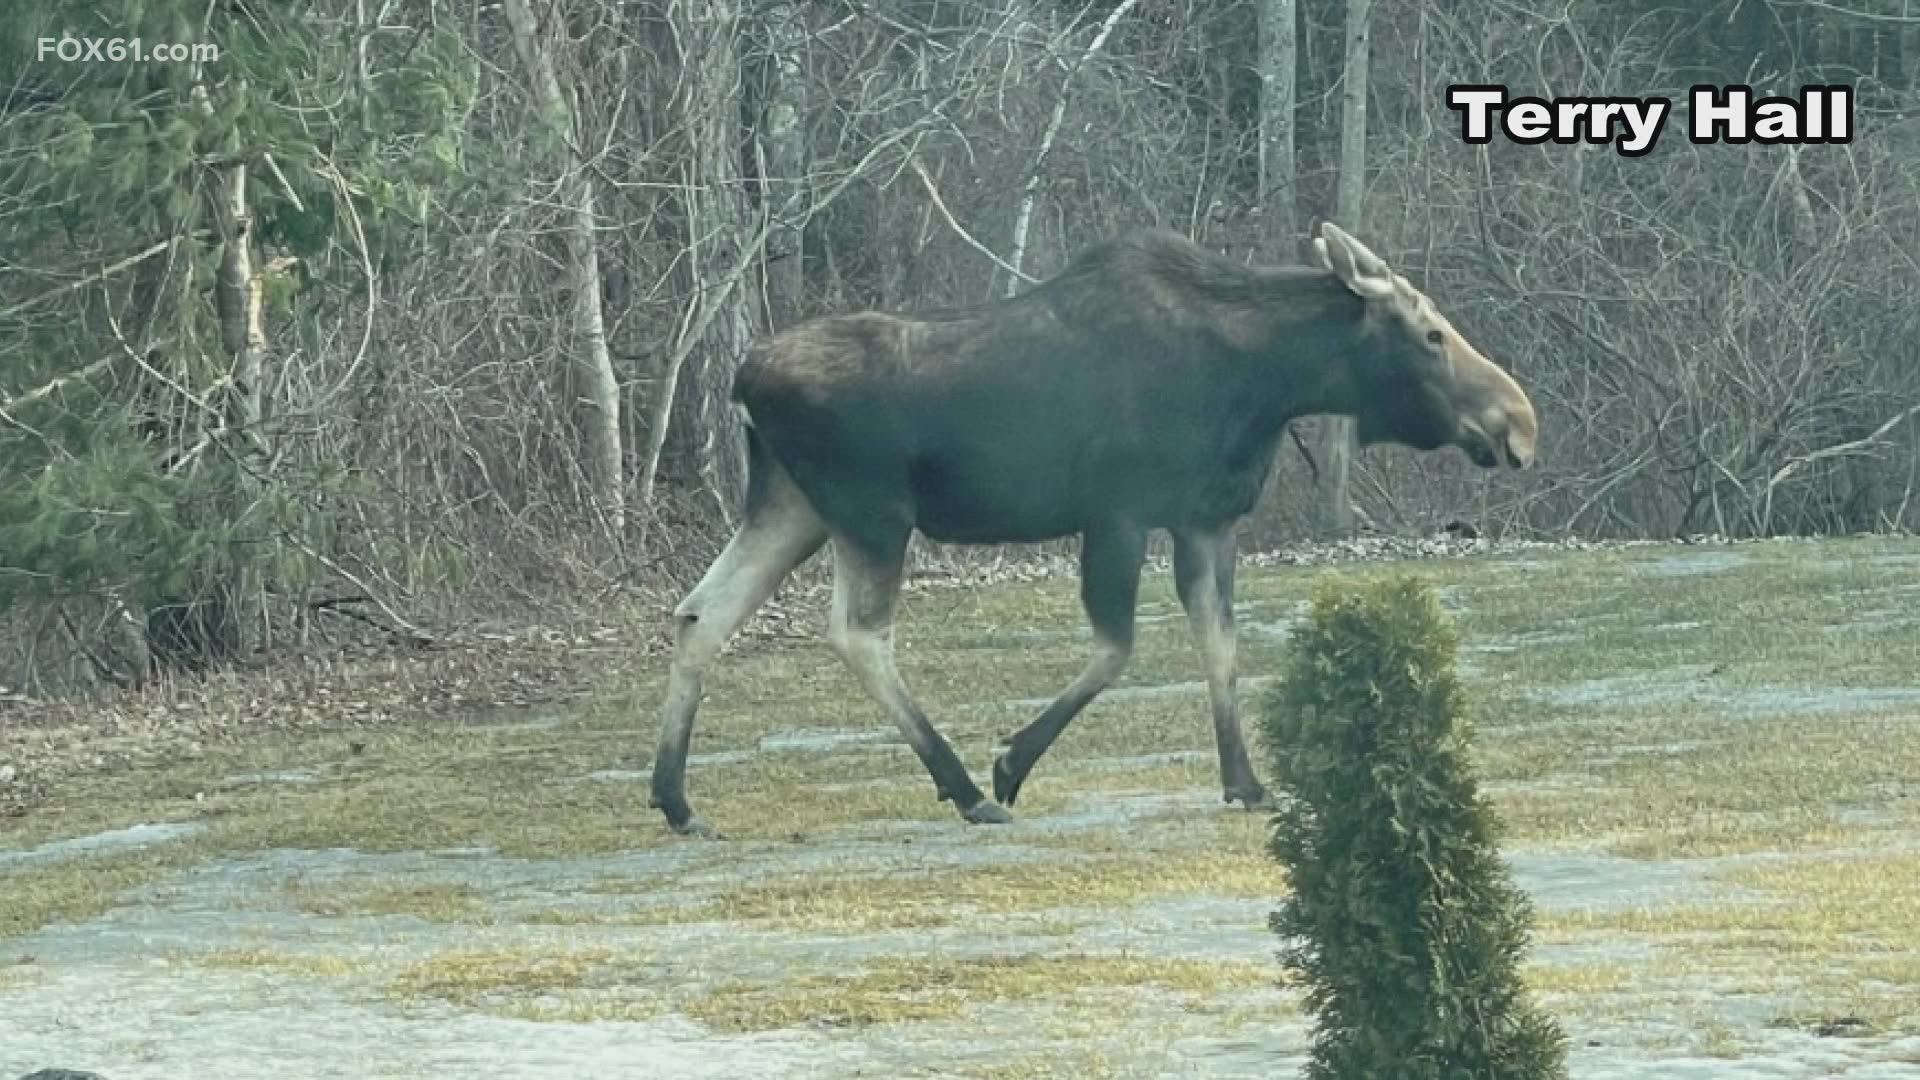 Police said people have been crowding the area around the moose and in some cases going into the woods to approach it.